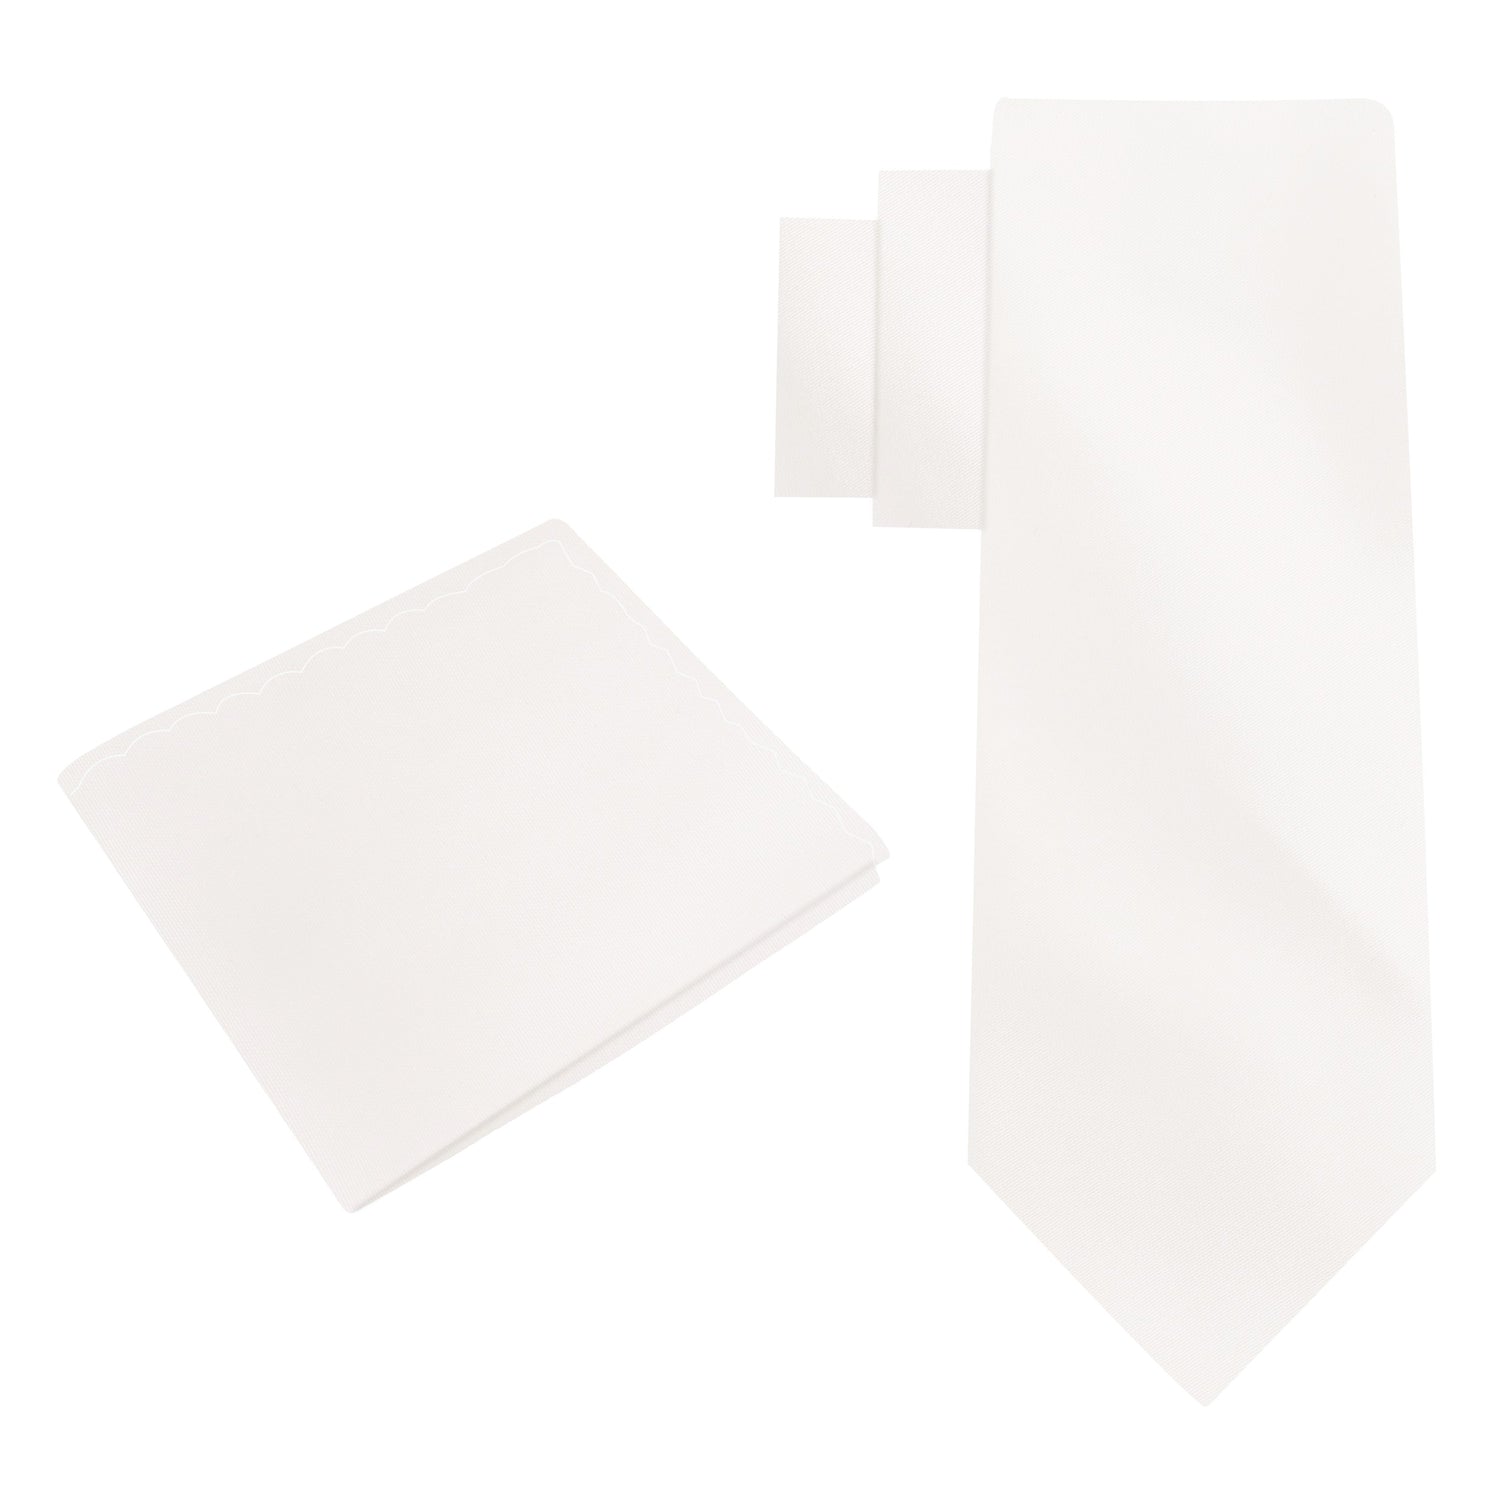 Alt View: Off White Tie and Pocket Square